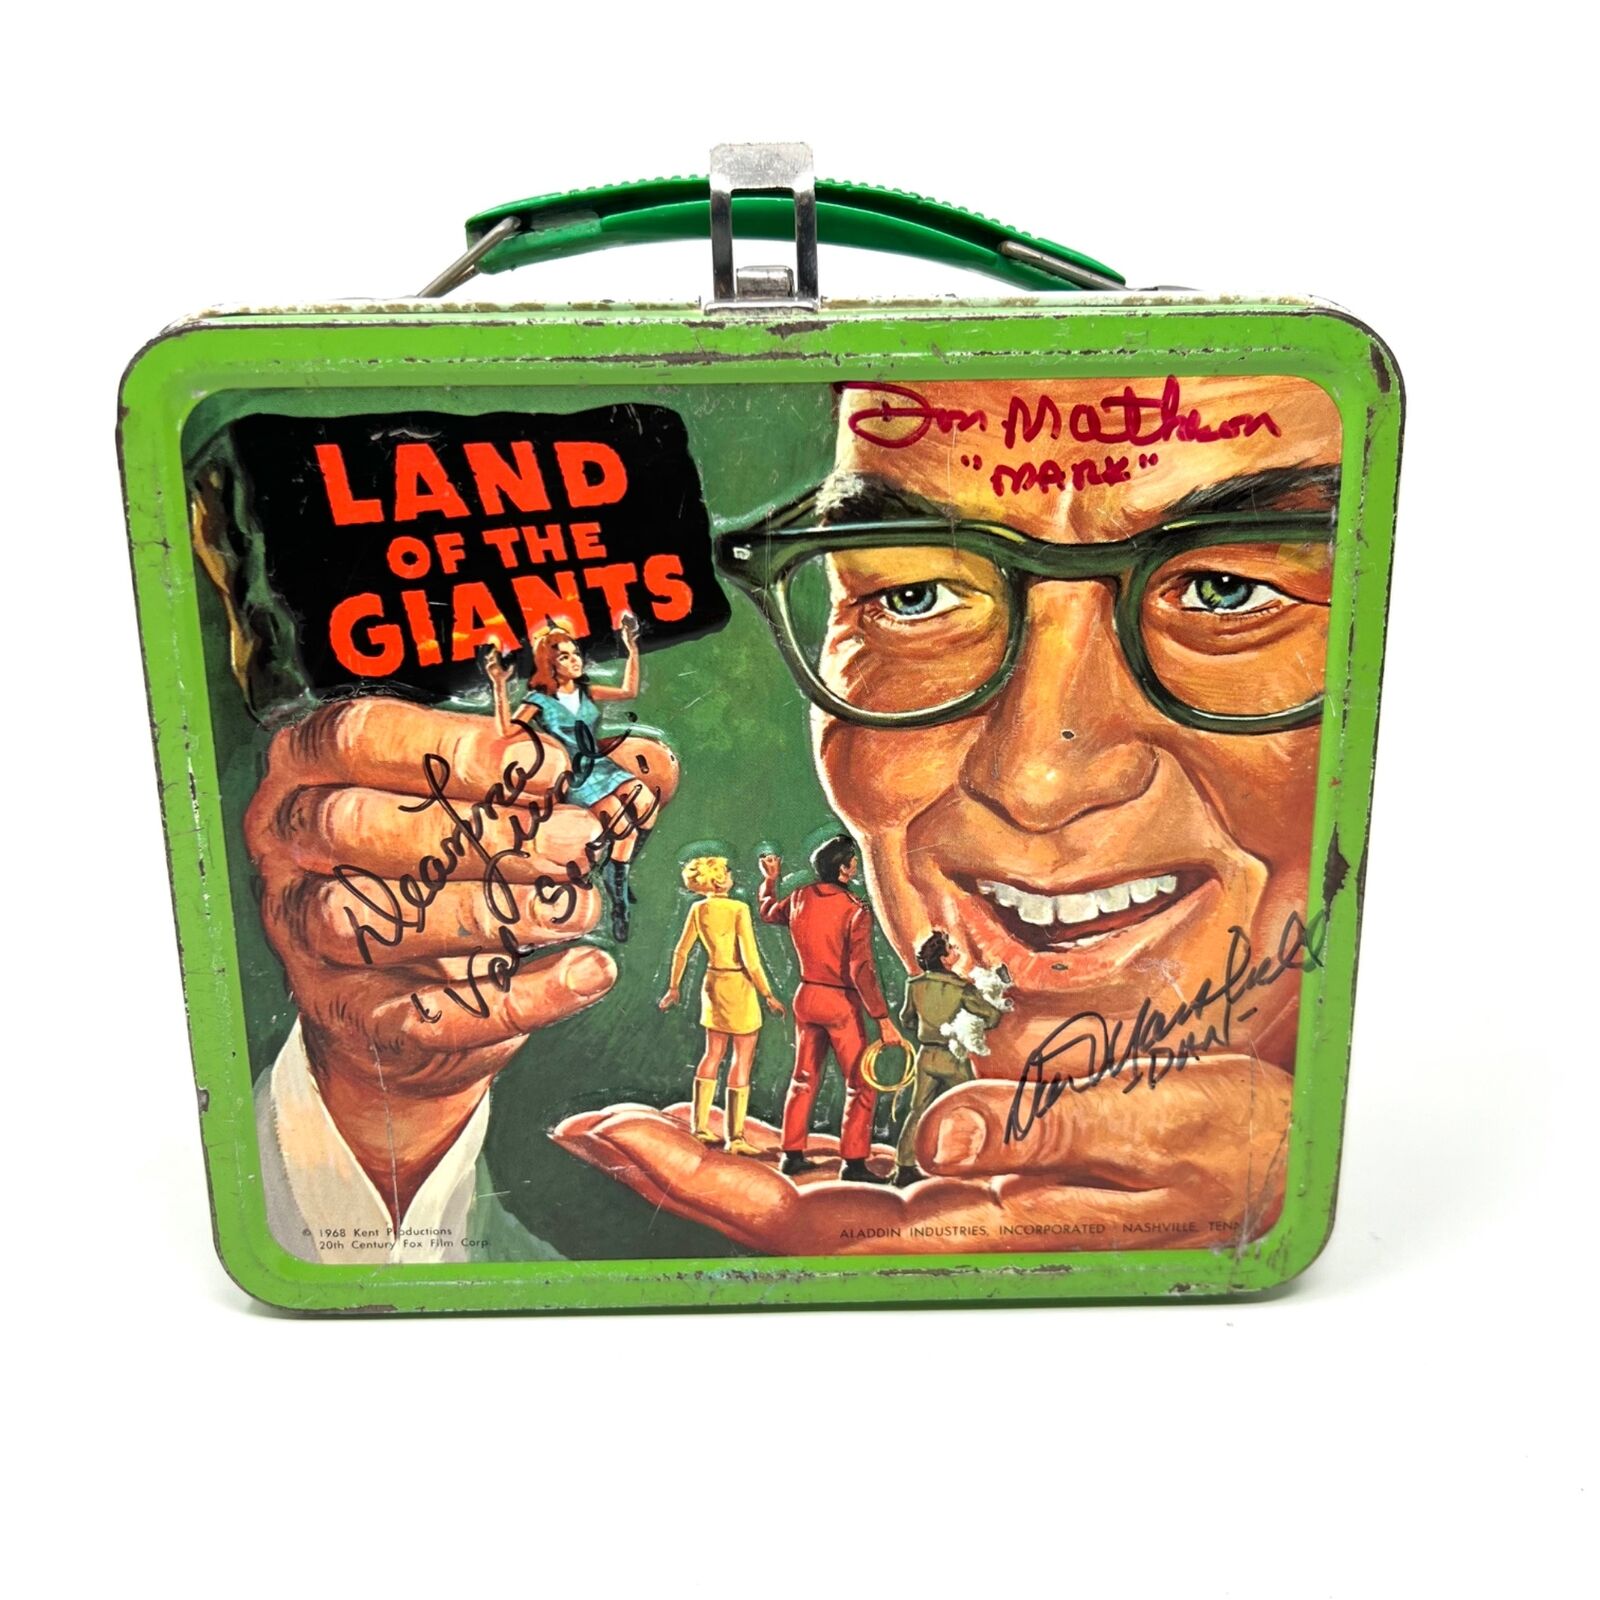 Vintage 1968 Land Of The Giants Metal Lunchbox Metal Lunch Box Autograph 3 times